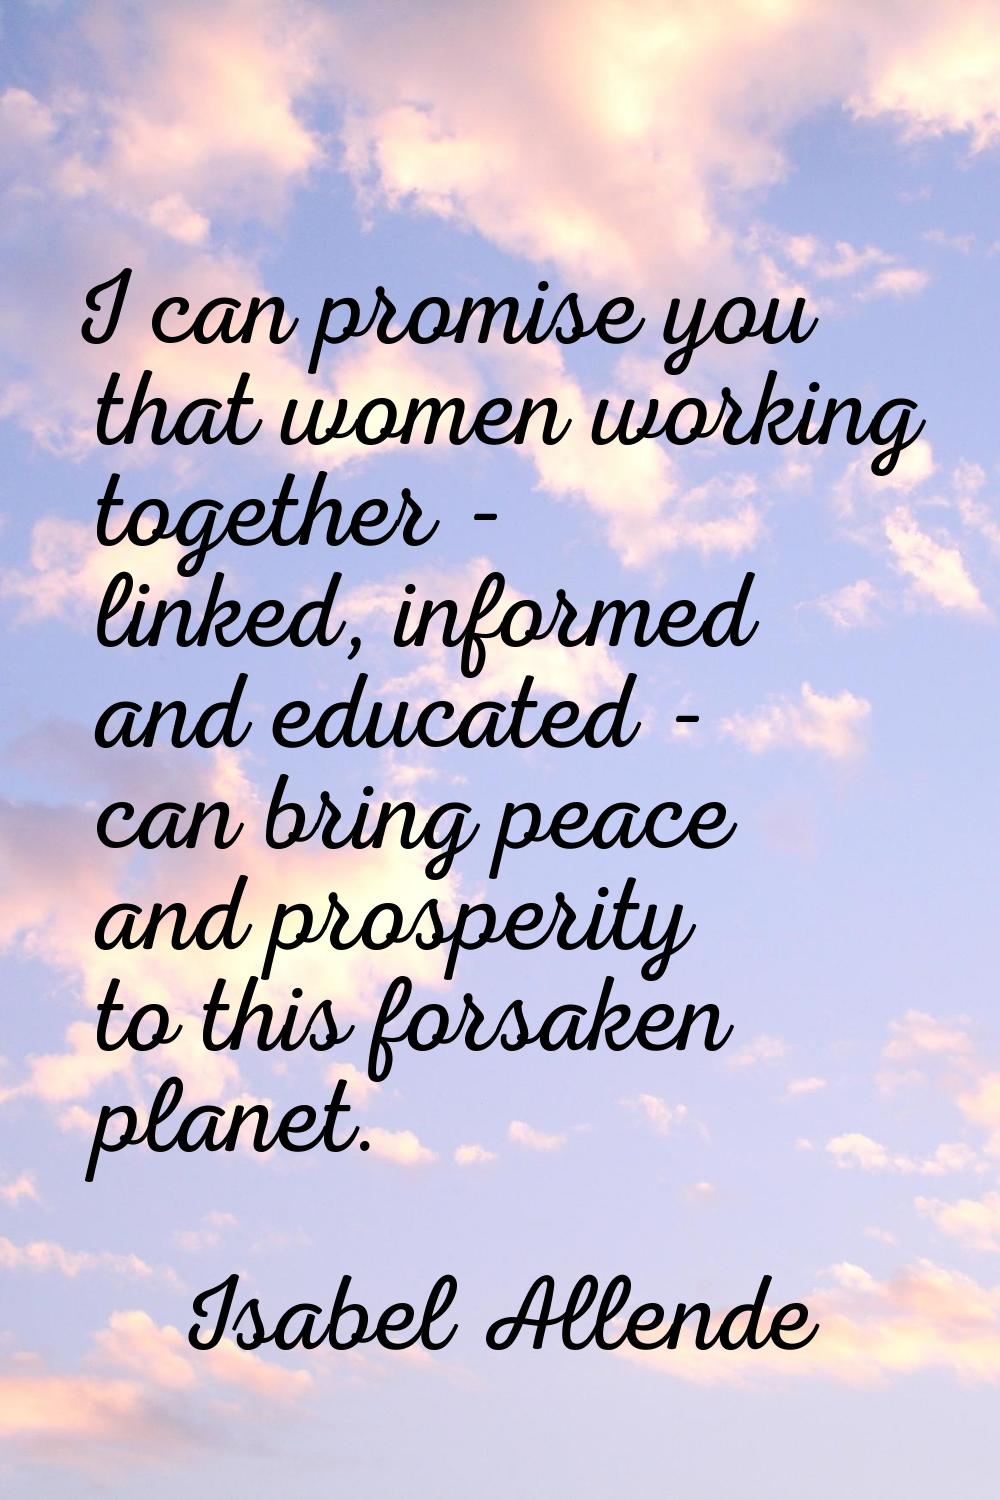 I can promise you that women working together - linked, informed and educated - can bring peace and